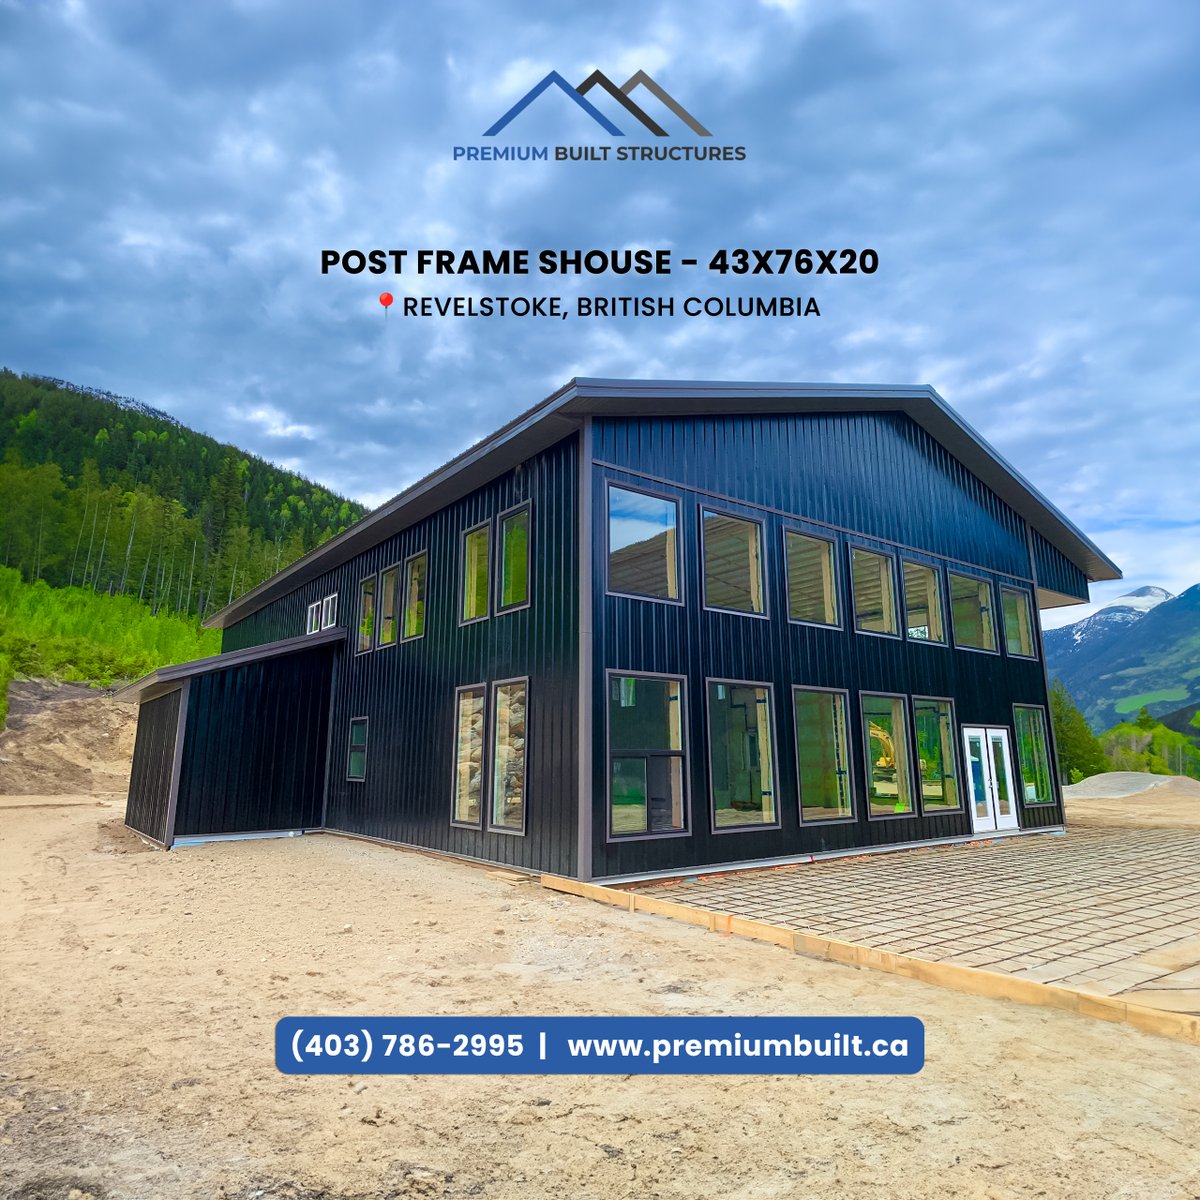 Step into the bold elegance of this black beauty!
This 43x76x20 post frame shouse was built in Revelstoke, British Columbia, combining the warmth of a home with the utility of a shop, all under one roof. 

#Albertabuilders #postframeconstruction #PremiumBuiltStrutures #alberta